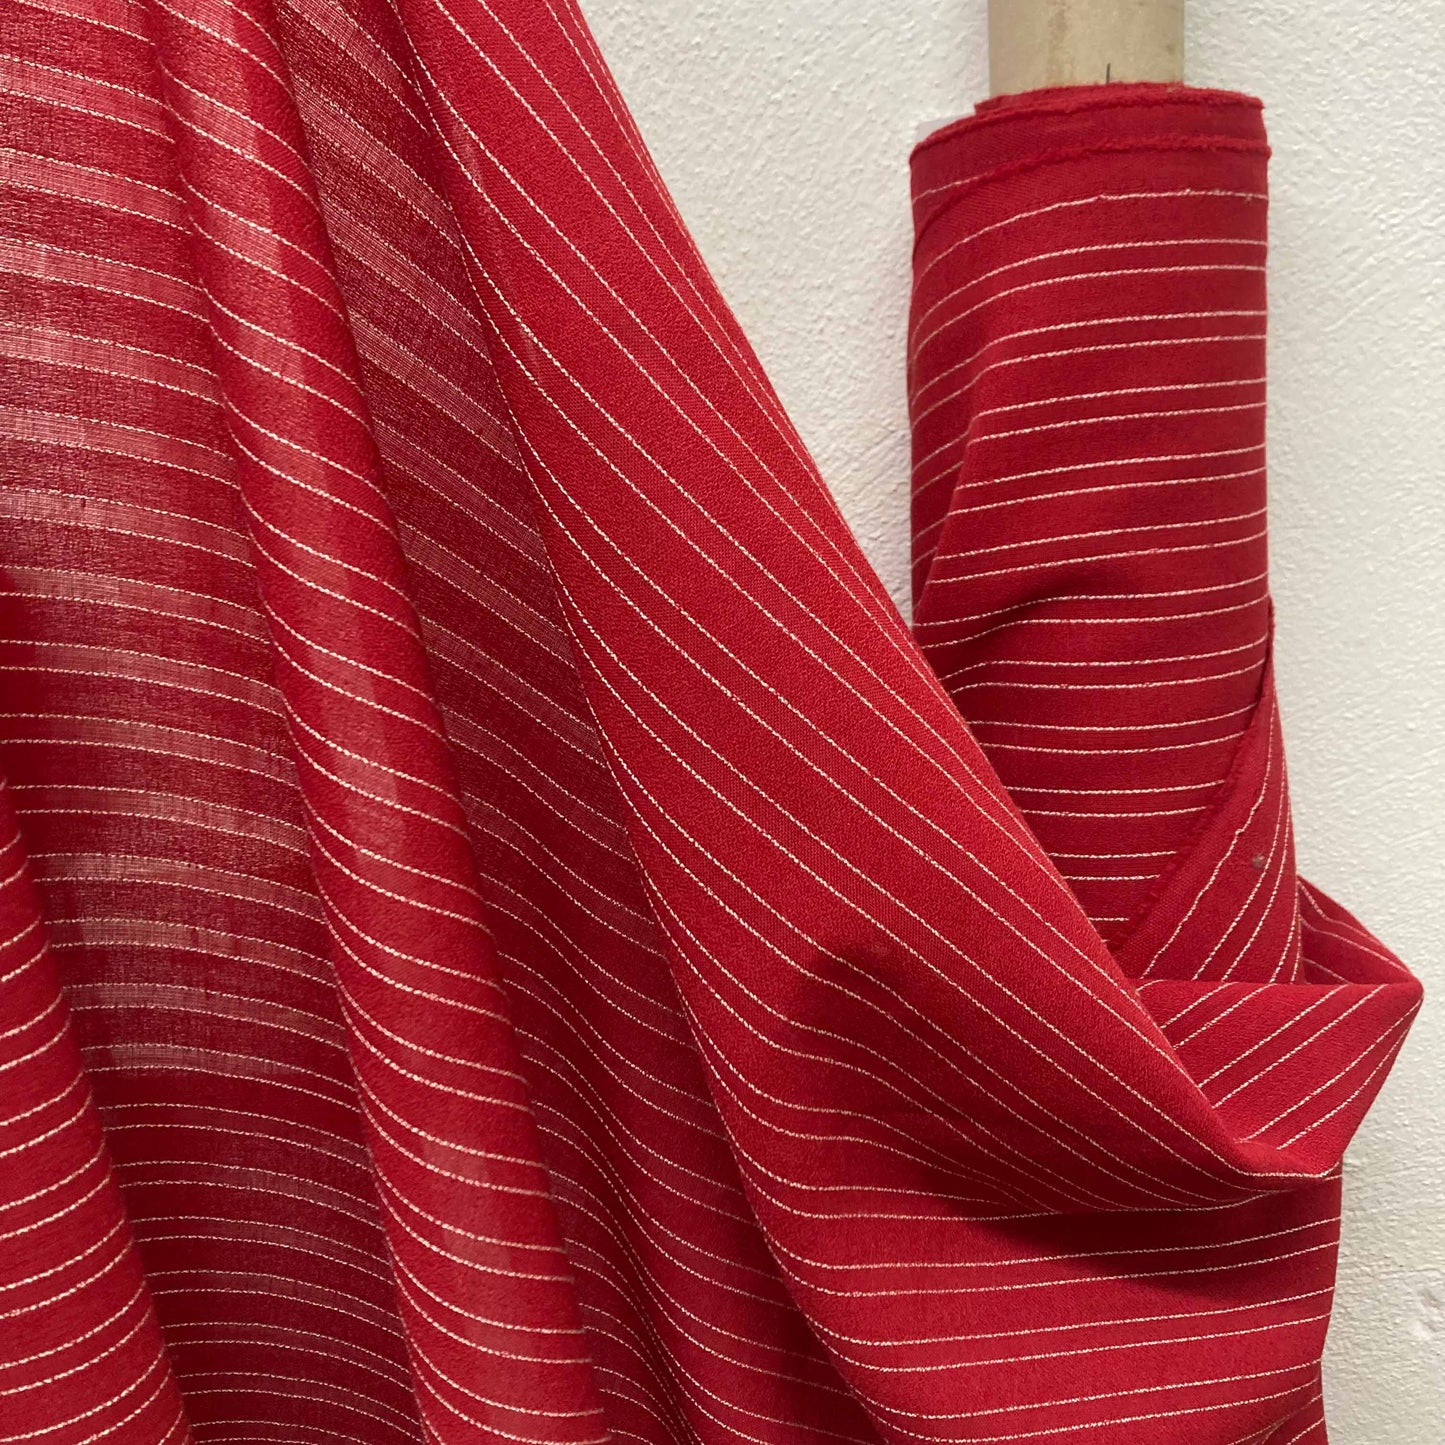 Crepe Fabric - Red, white